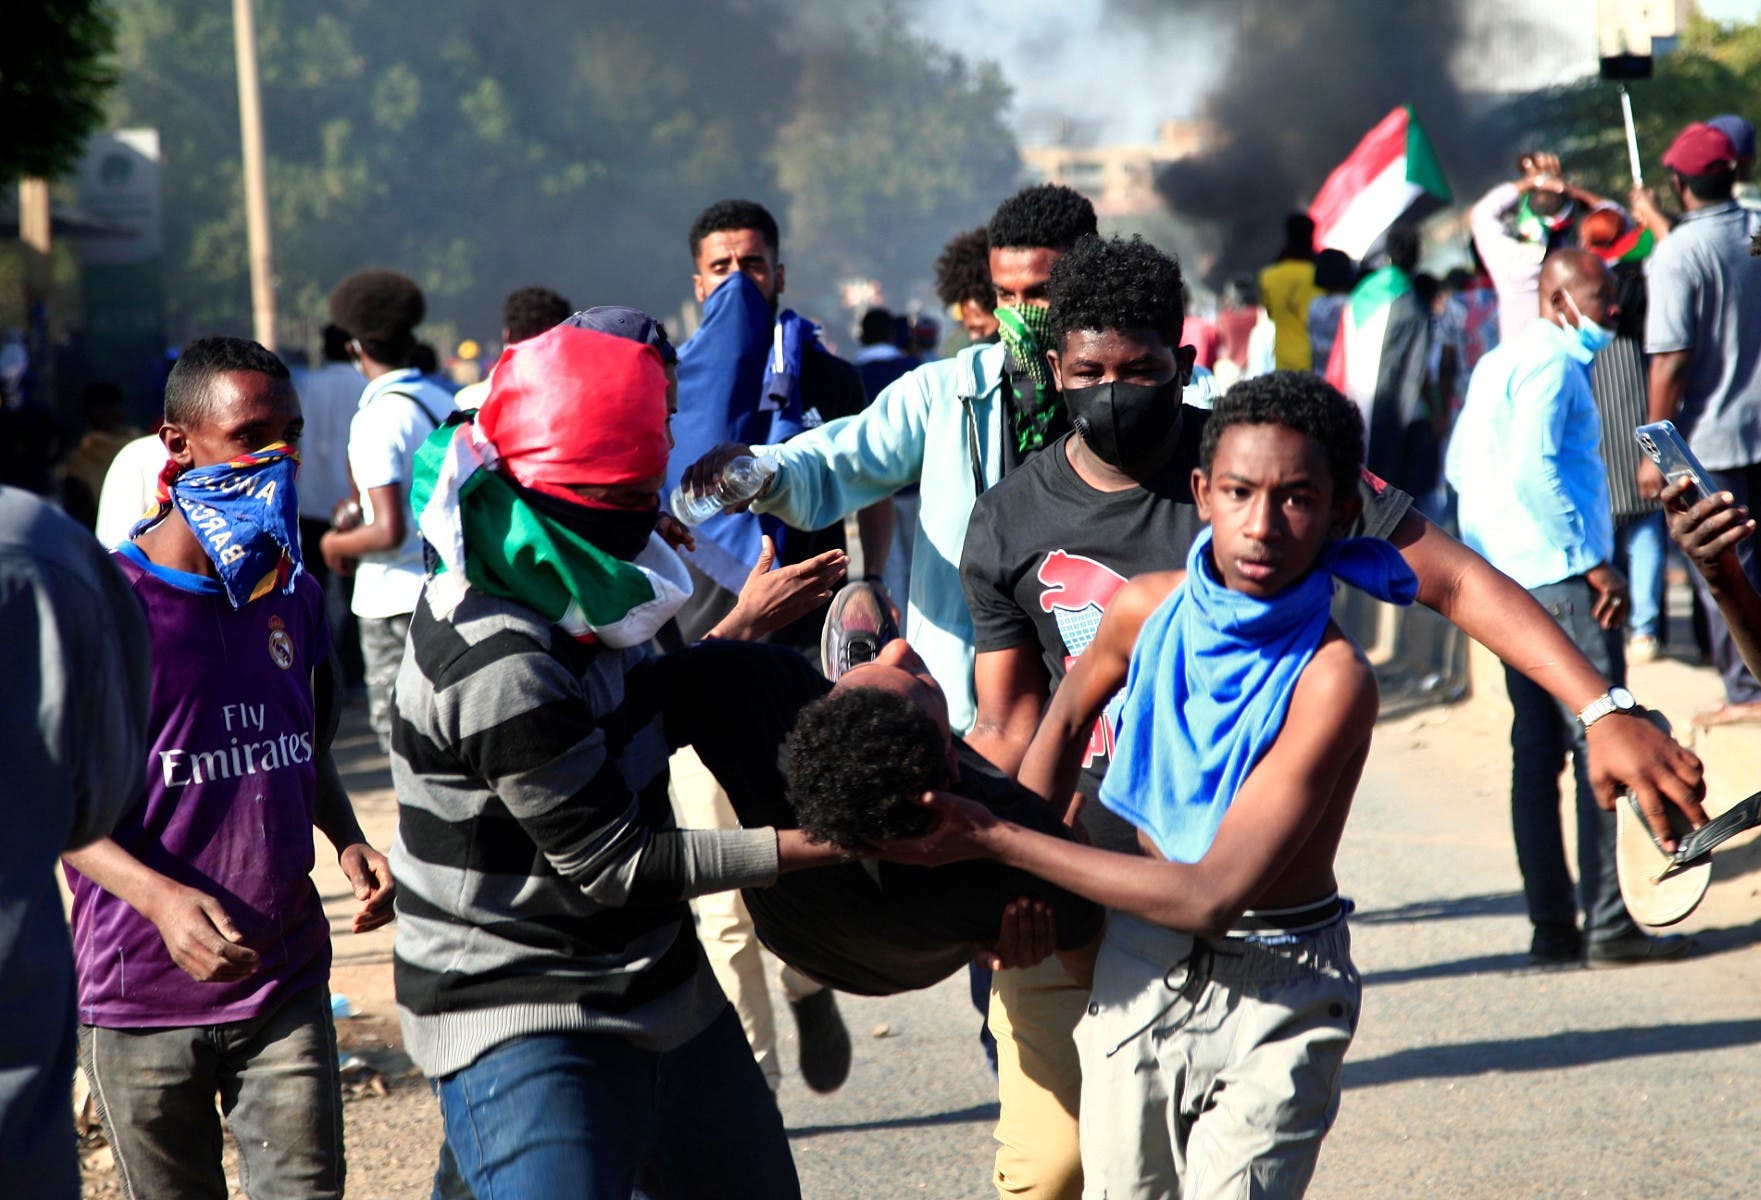 Sudanese demonstrators carry a wounded man during a protest demanding civilian rule in the Street 40 of the Sudanese capital's twin city of Omdurman on January 4, 2022. (AFP)